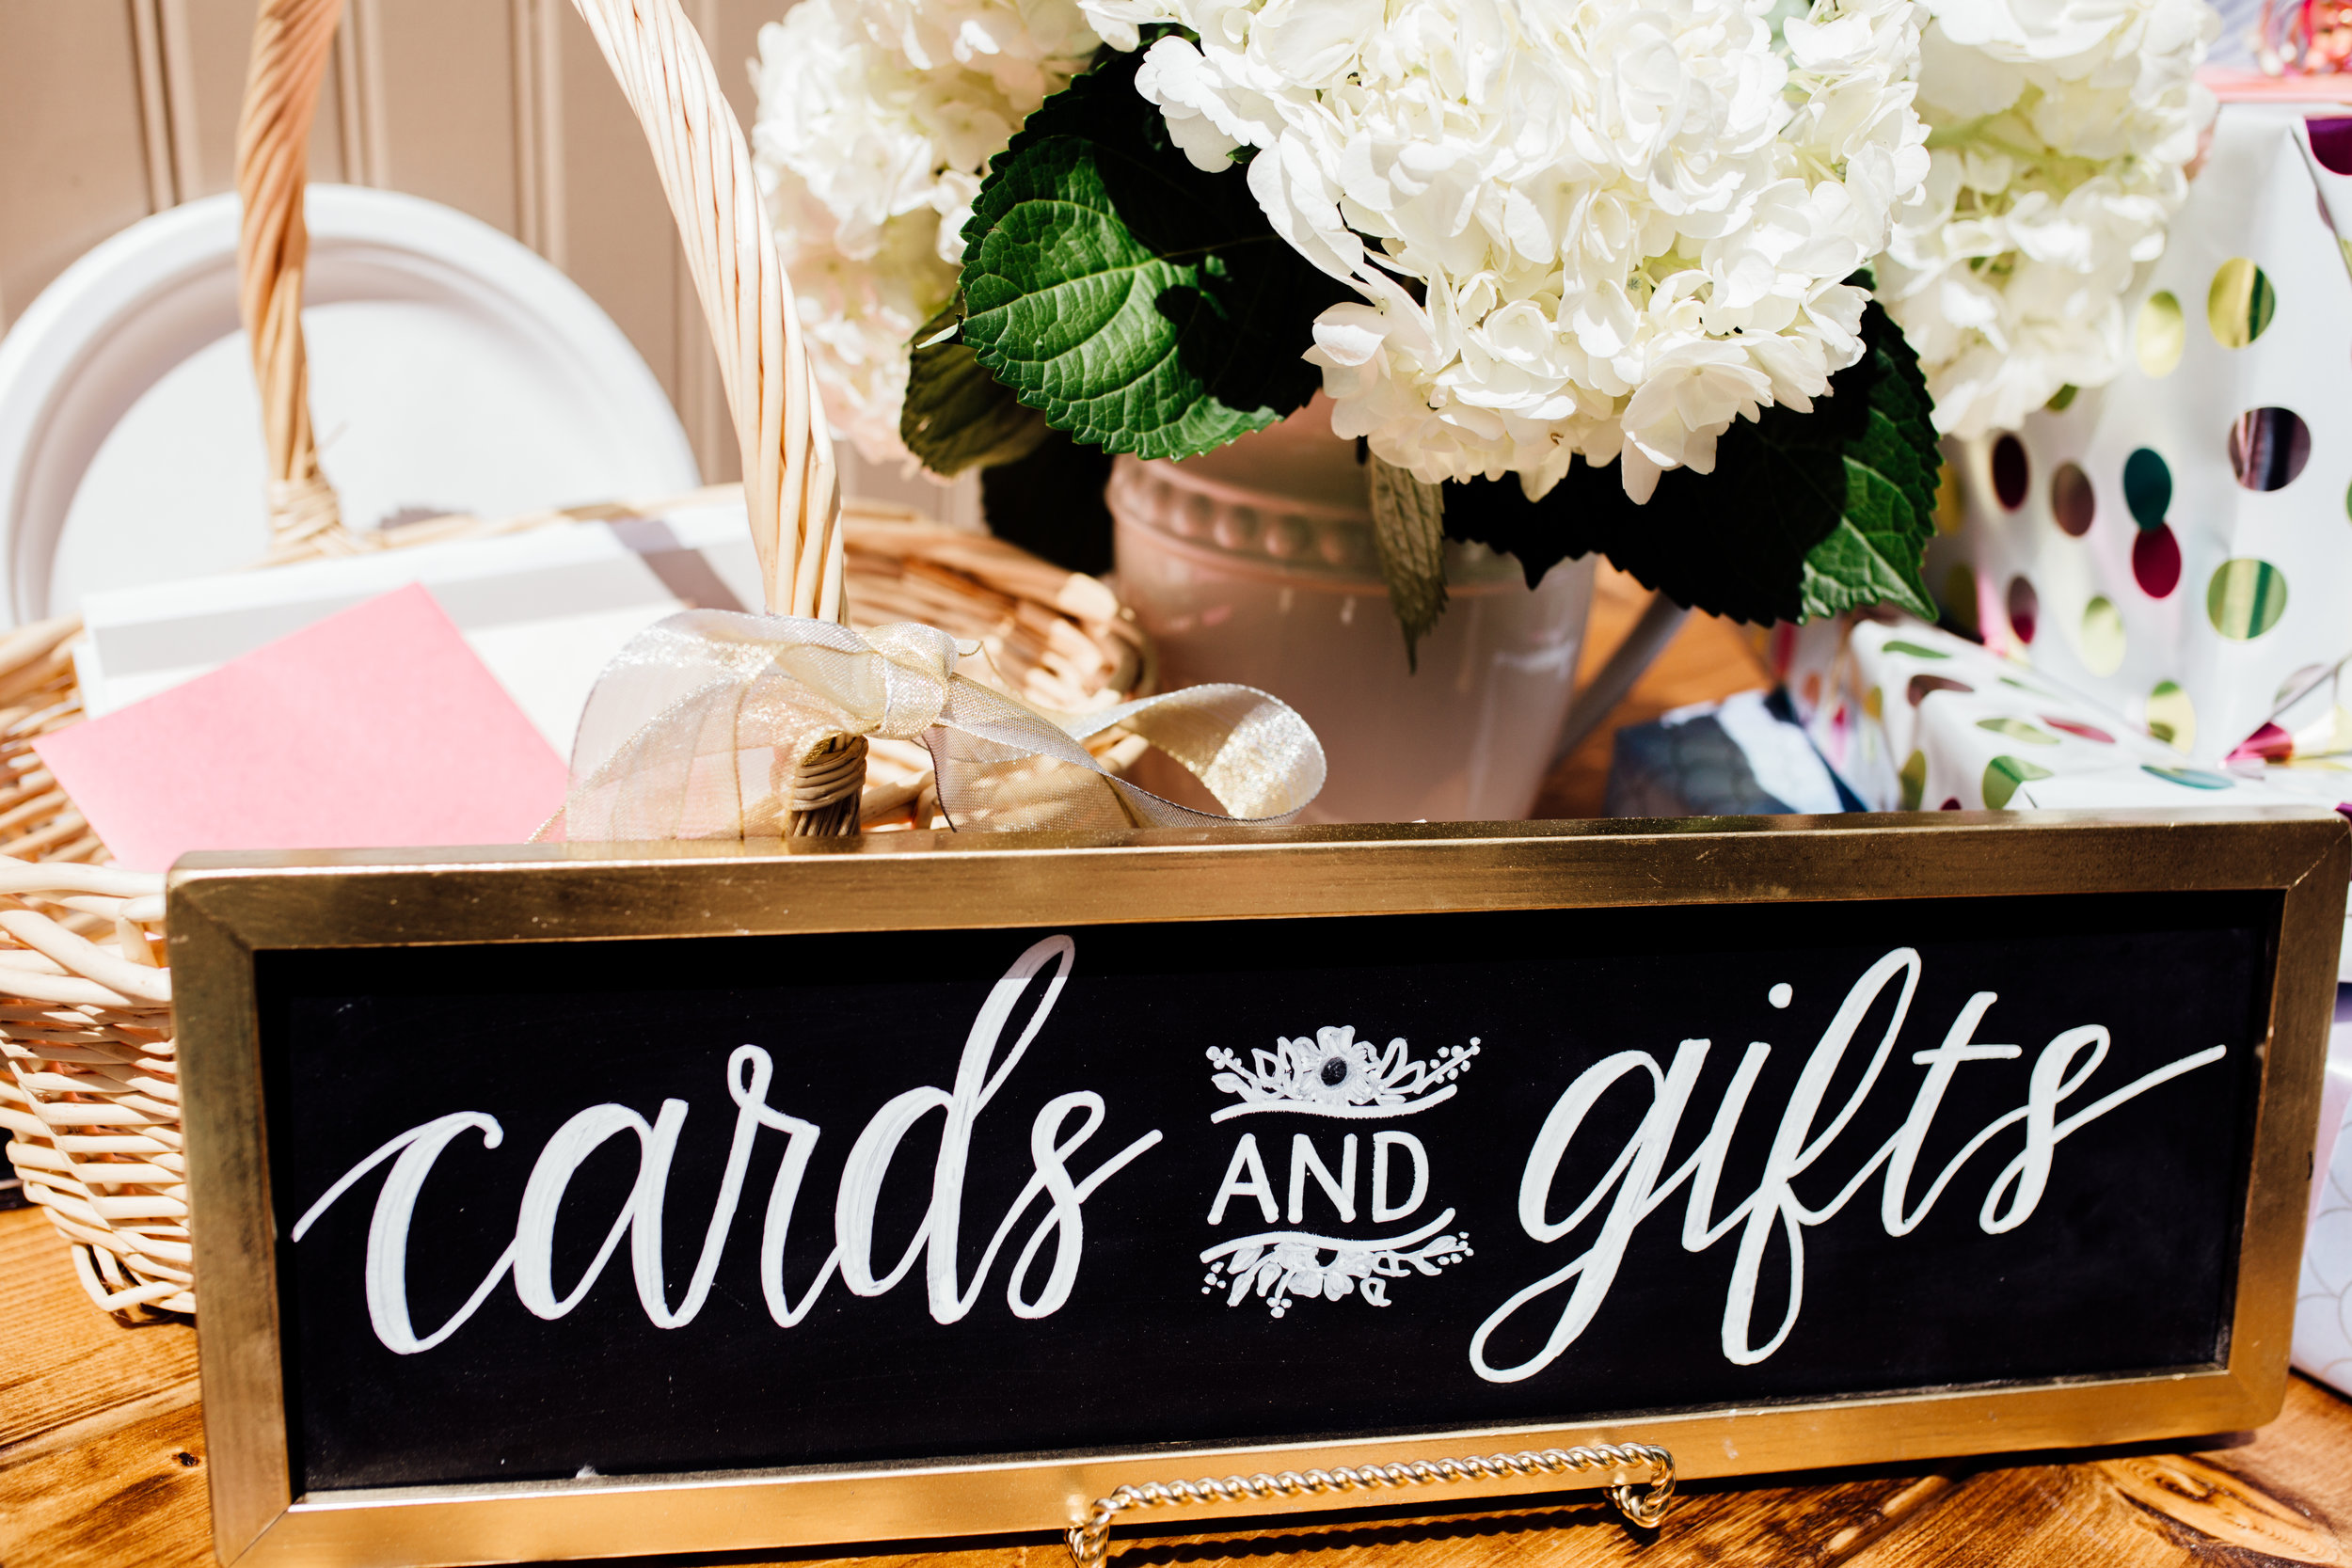 Chalkboard Cards and Gifts